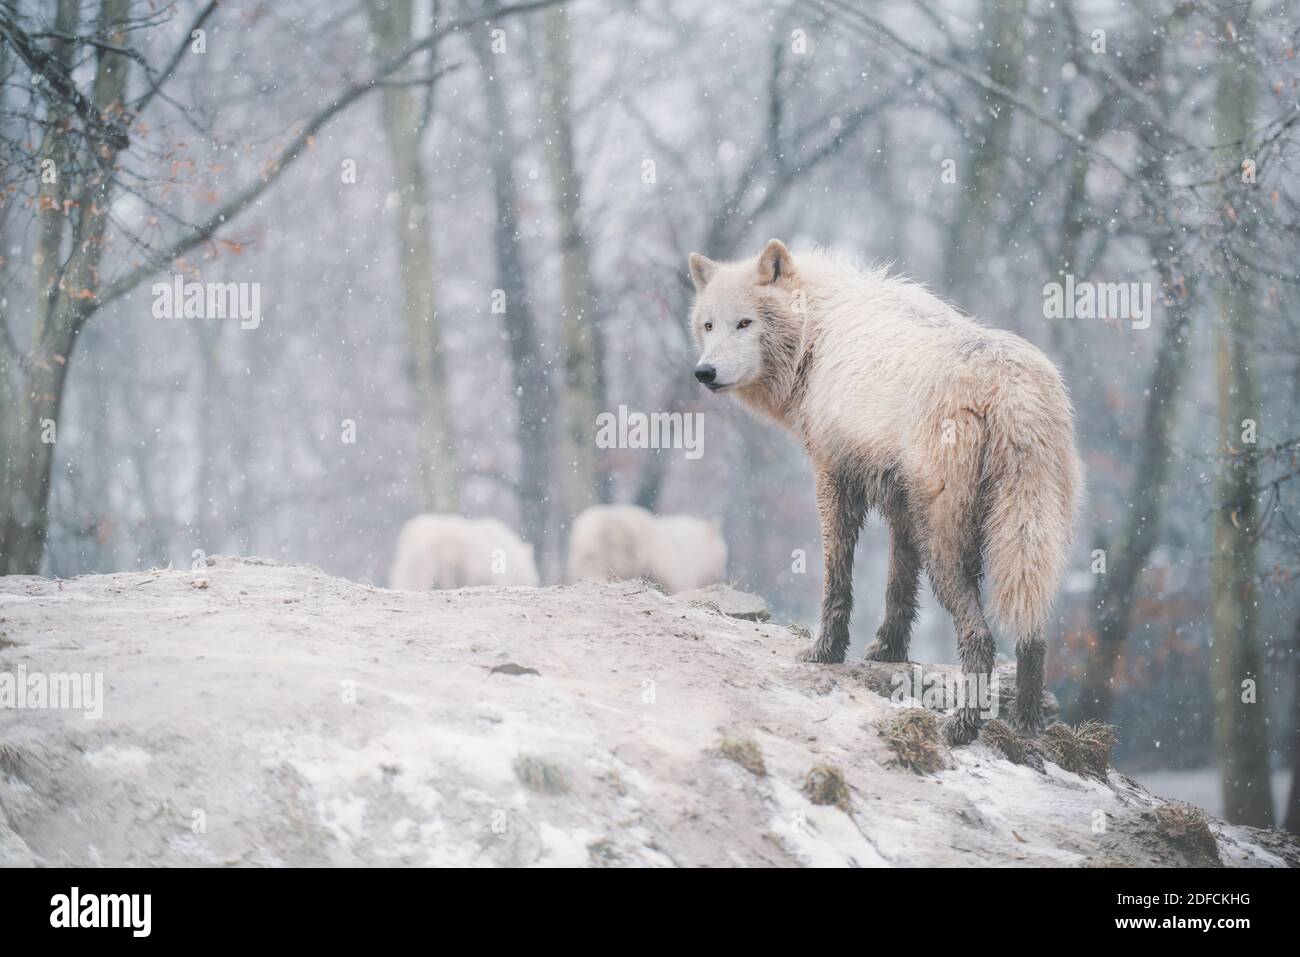 Arctic wolf (Canis lupus arctos) standing on a forest hill during snowfall. This type of wolf is also known as the white wolf or polar wolf. Stock Photo